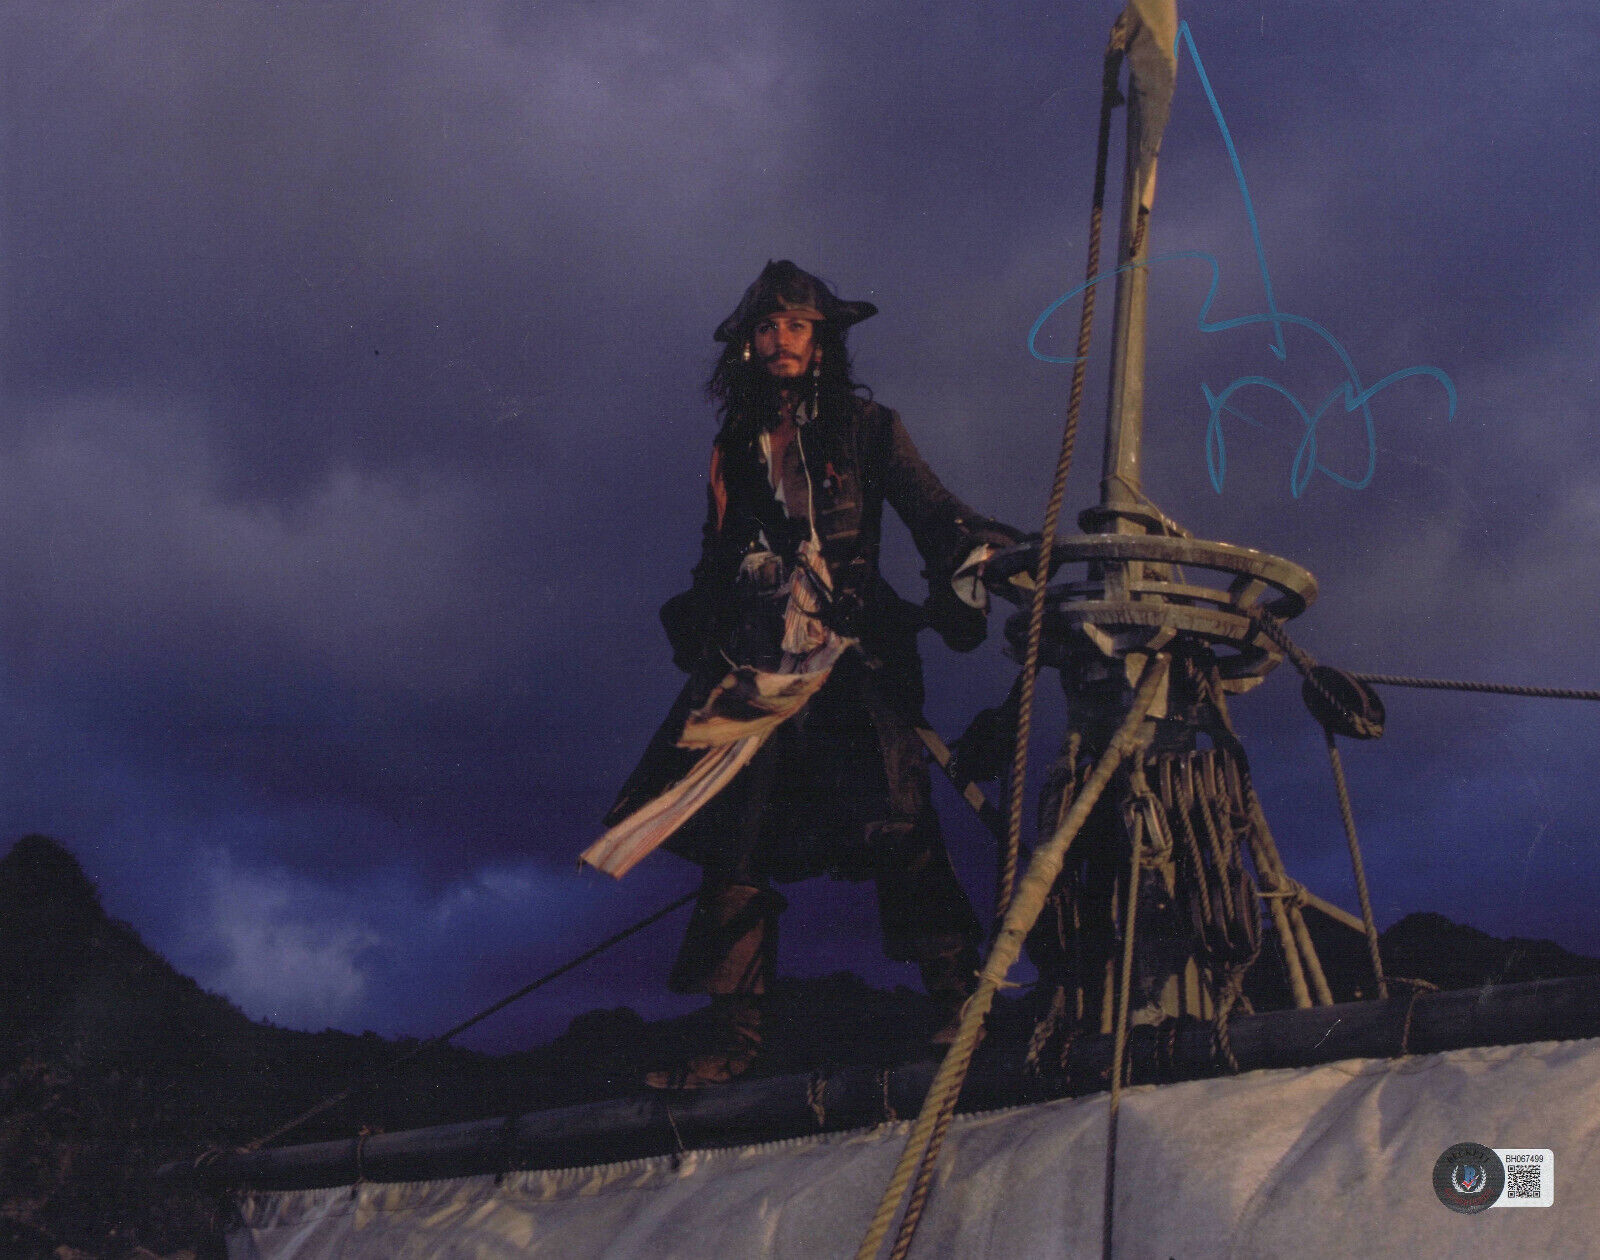 JOHNNY DEPP SIGNED \'PIRATES OF THE CARIBBEAN\' 11X14 PHOTO AUTOGRAPH BECKETT